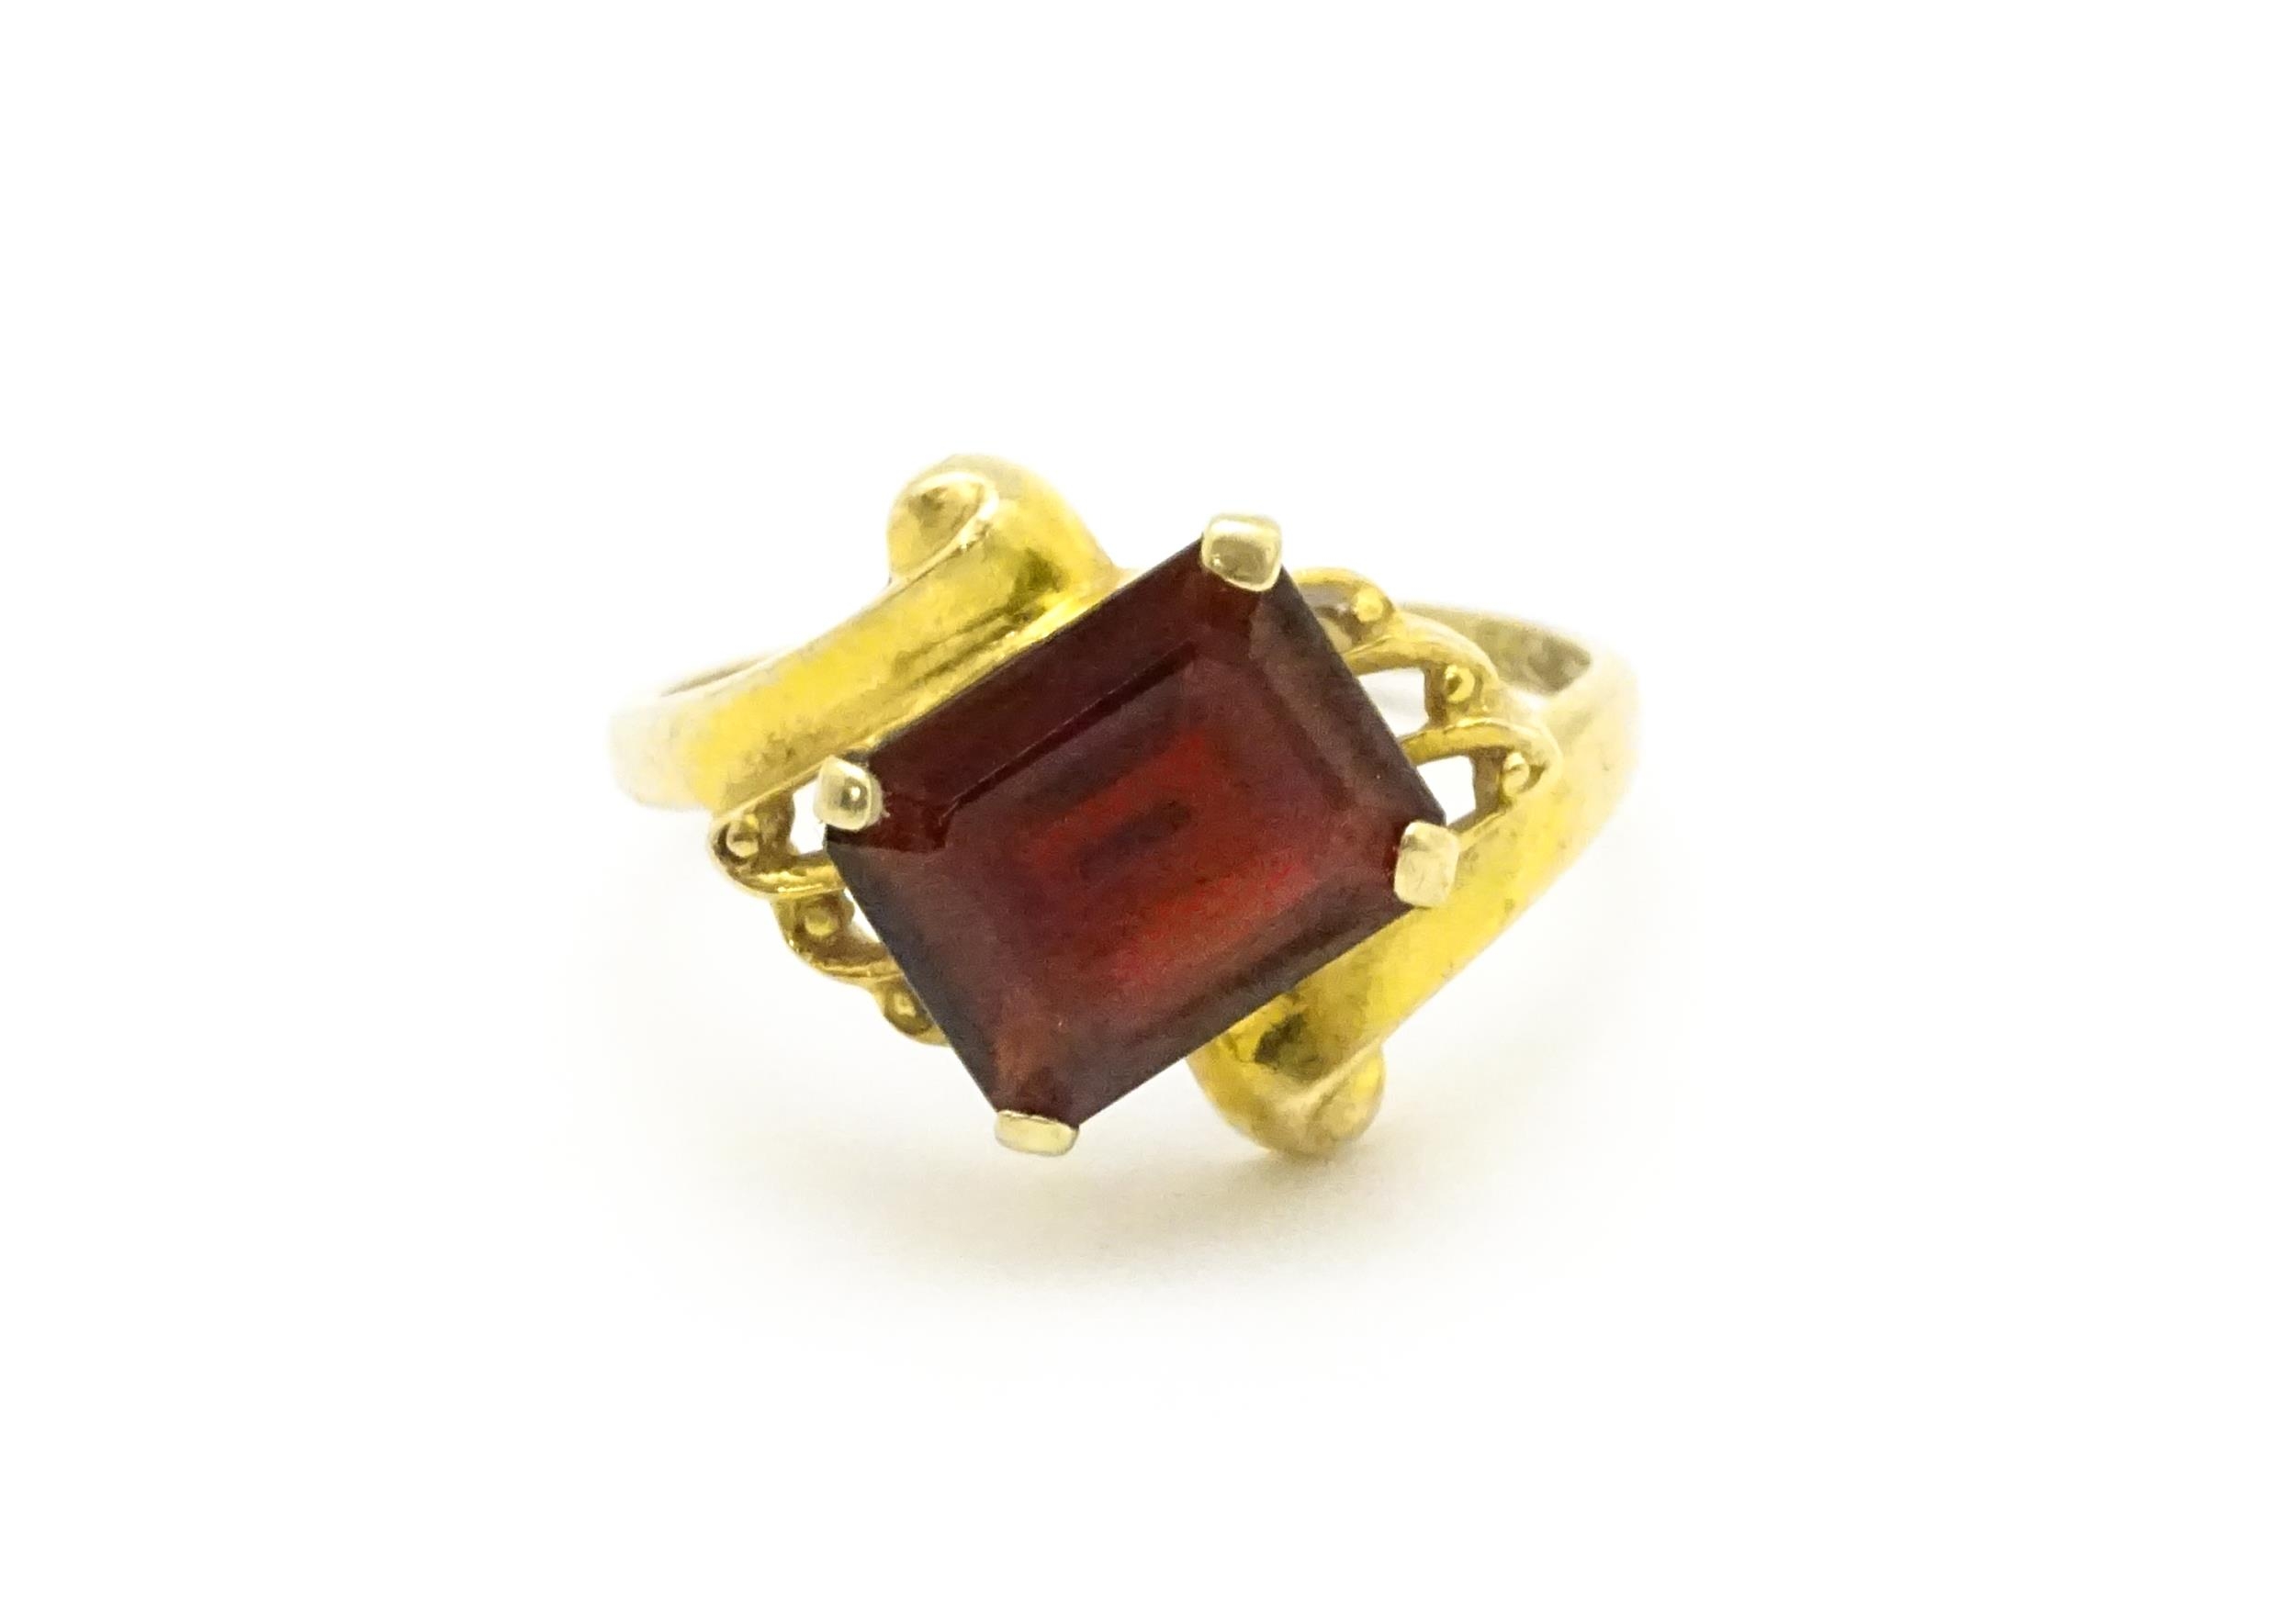 A 9ct gold ring set with central garnet. Ring size approx. O 1/2 Please Note - we do not make